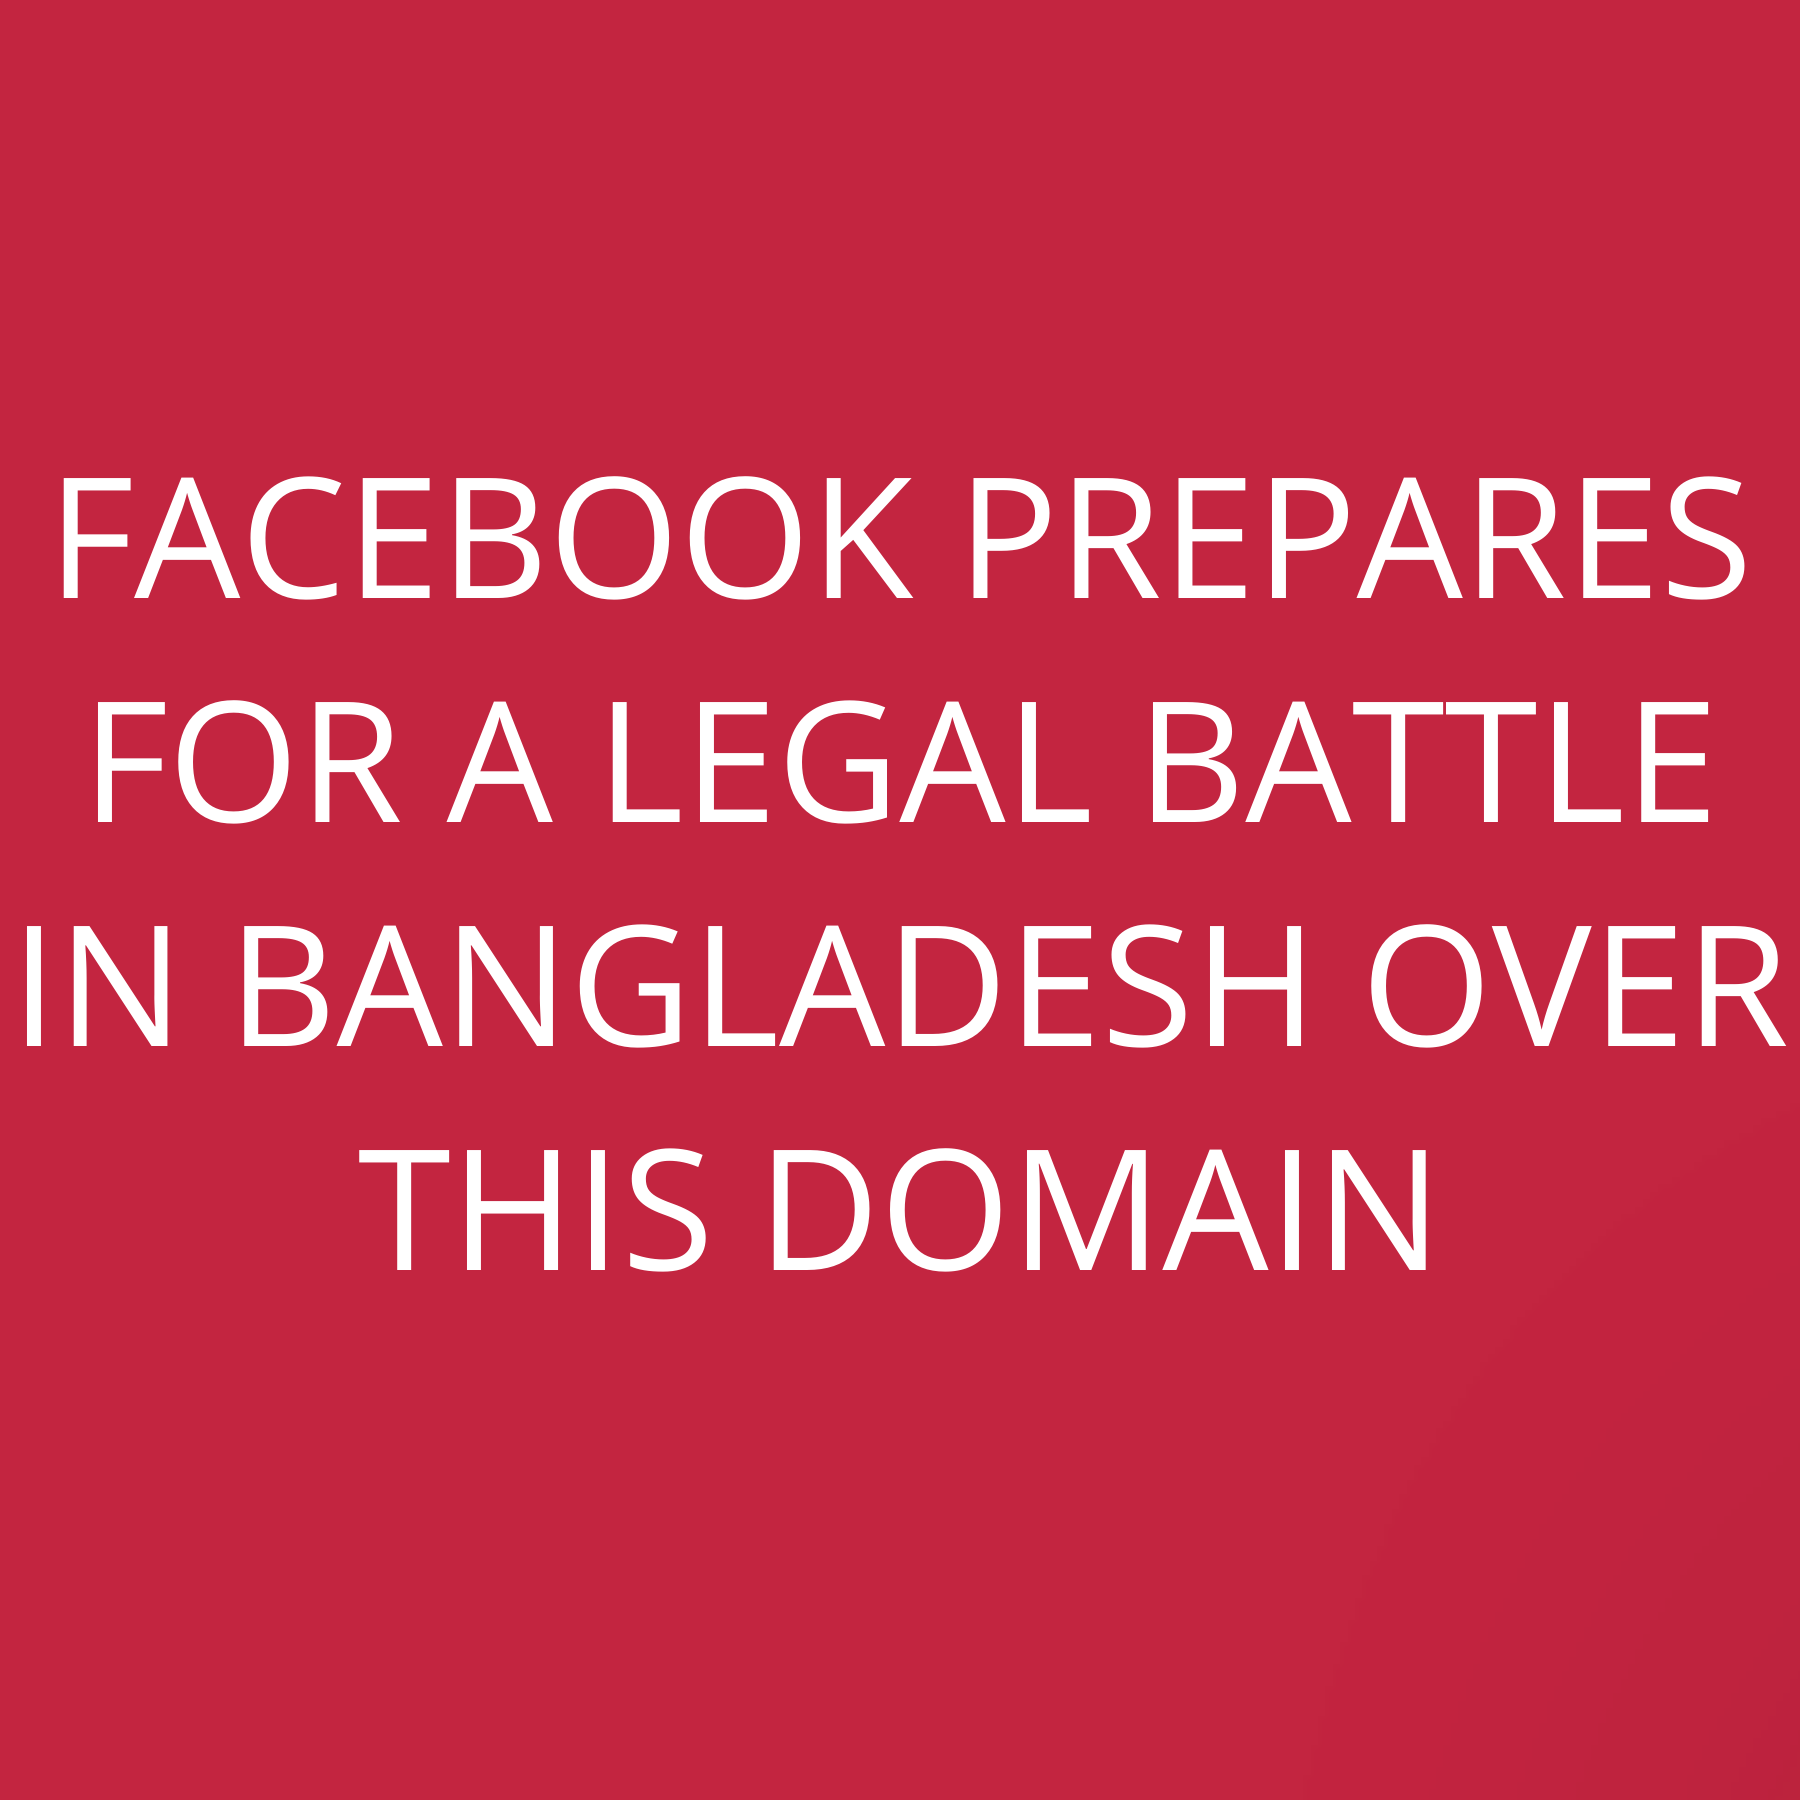 Facebook prepares for a legal battle in Bangladesh over this domain